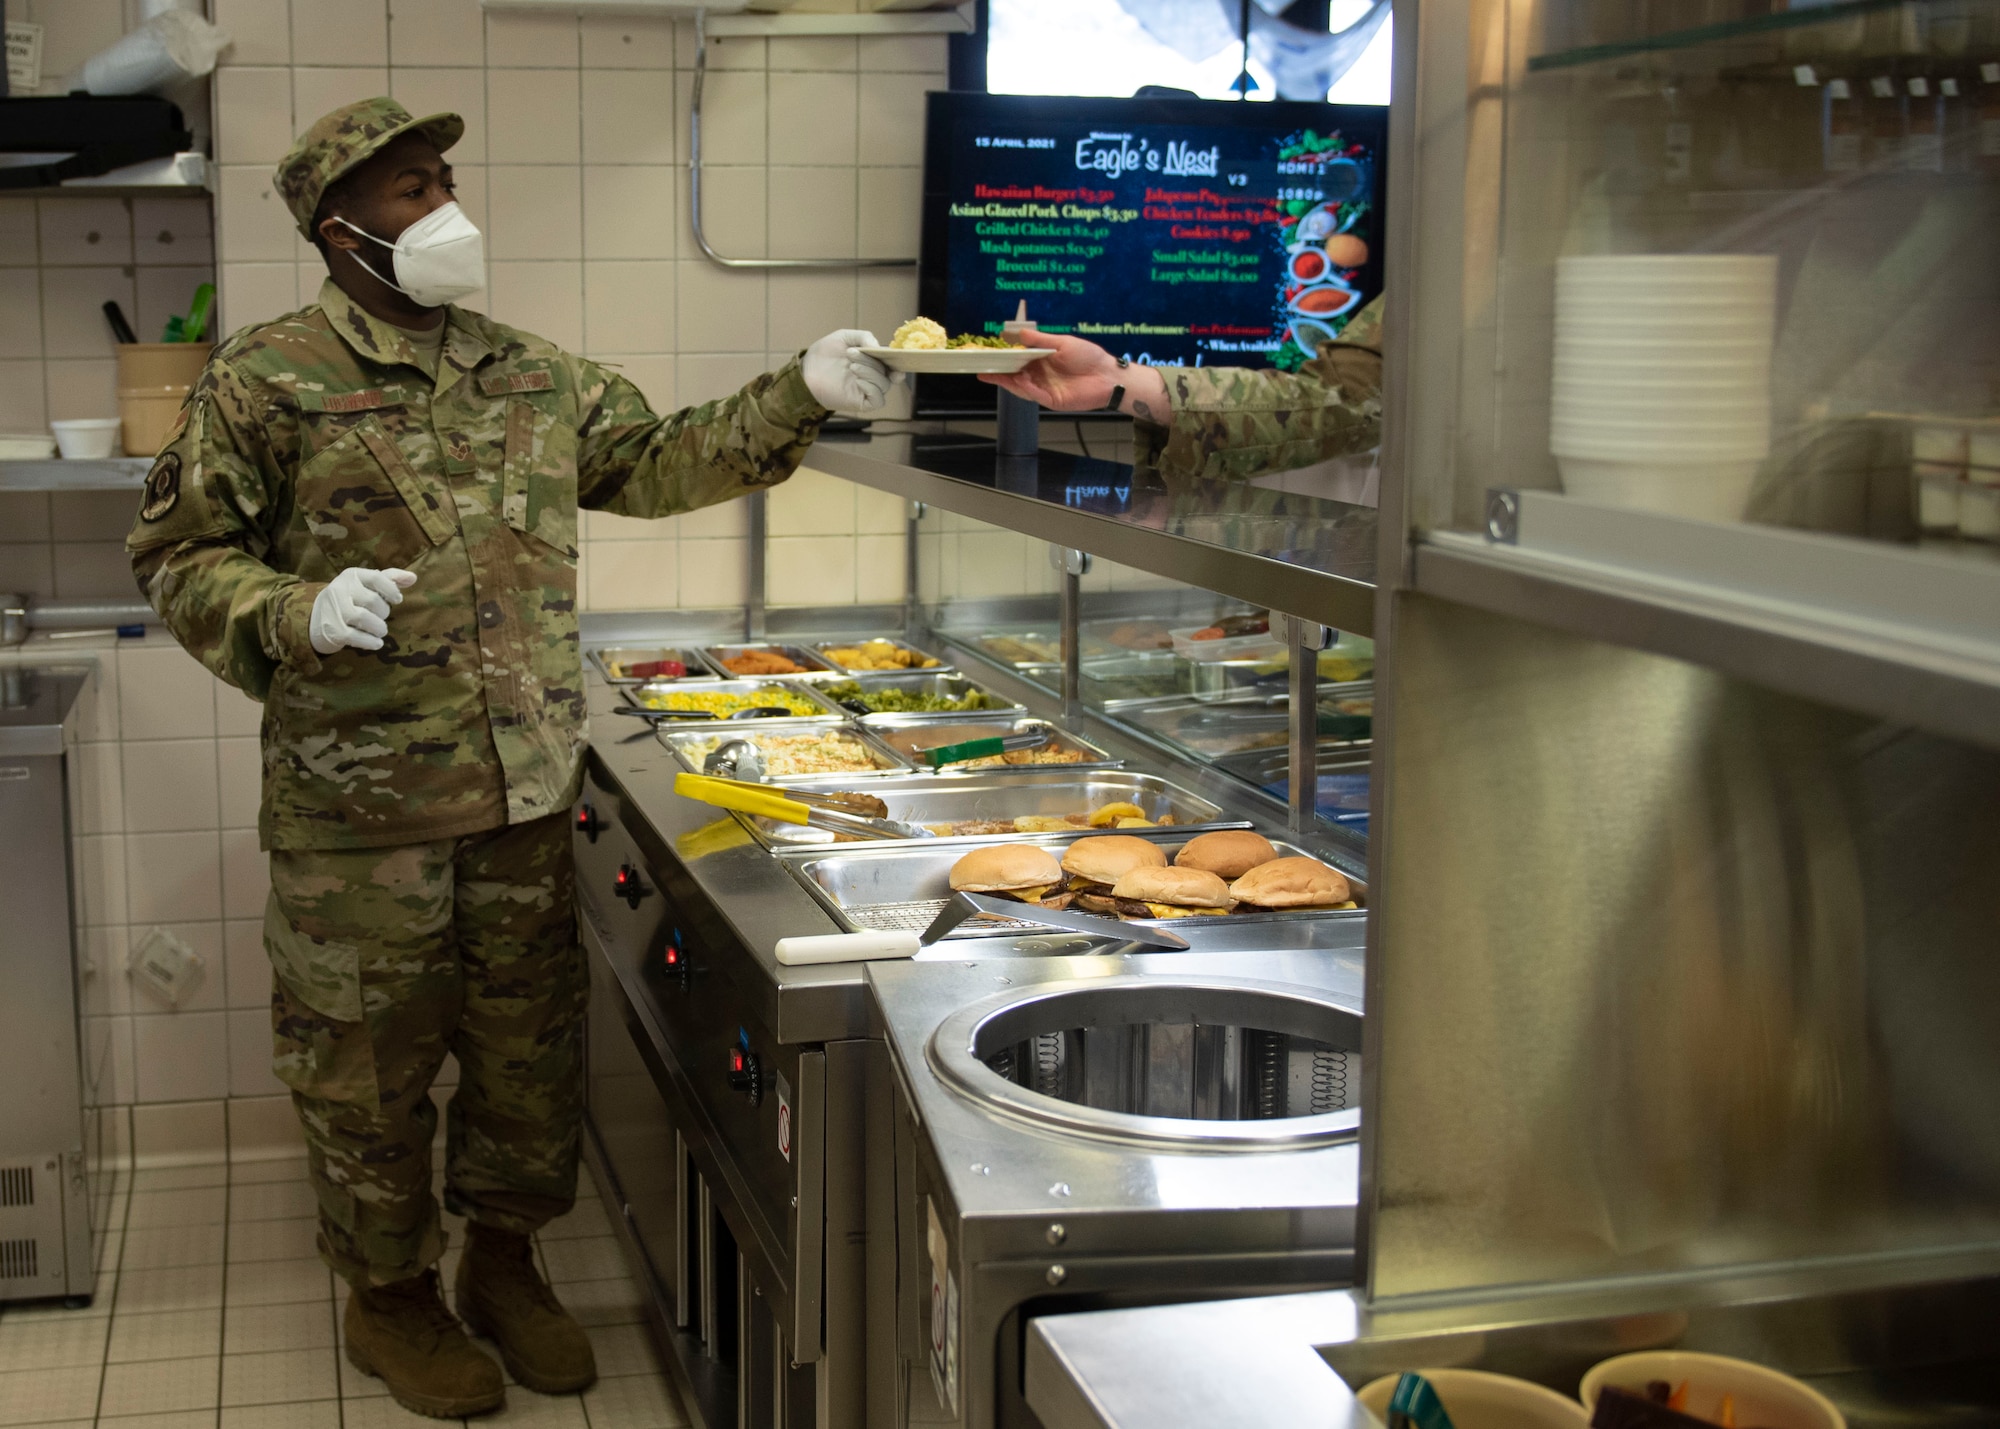 U.S. Air Force Senior Airman Andrew Logwood, 702nd Mission Support Flight dining facility storeroom manager, works the dining facility line, April 15, 2021, at the 702nd Munitions Support Squadron. The 702nd MSF Airmen recently won the Hennessy Award, which recognizes food handling excellence amongst Air Force dining facilities. (U.S. Air Force photo by Senior Airman Melody W. Howley)